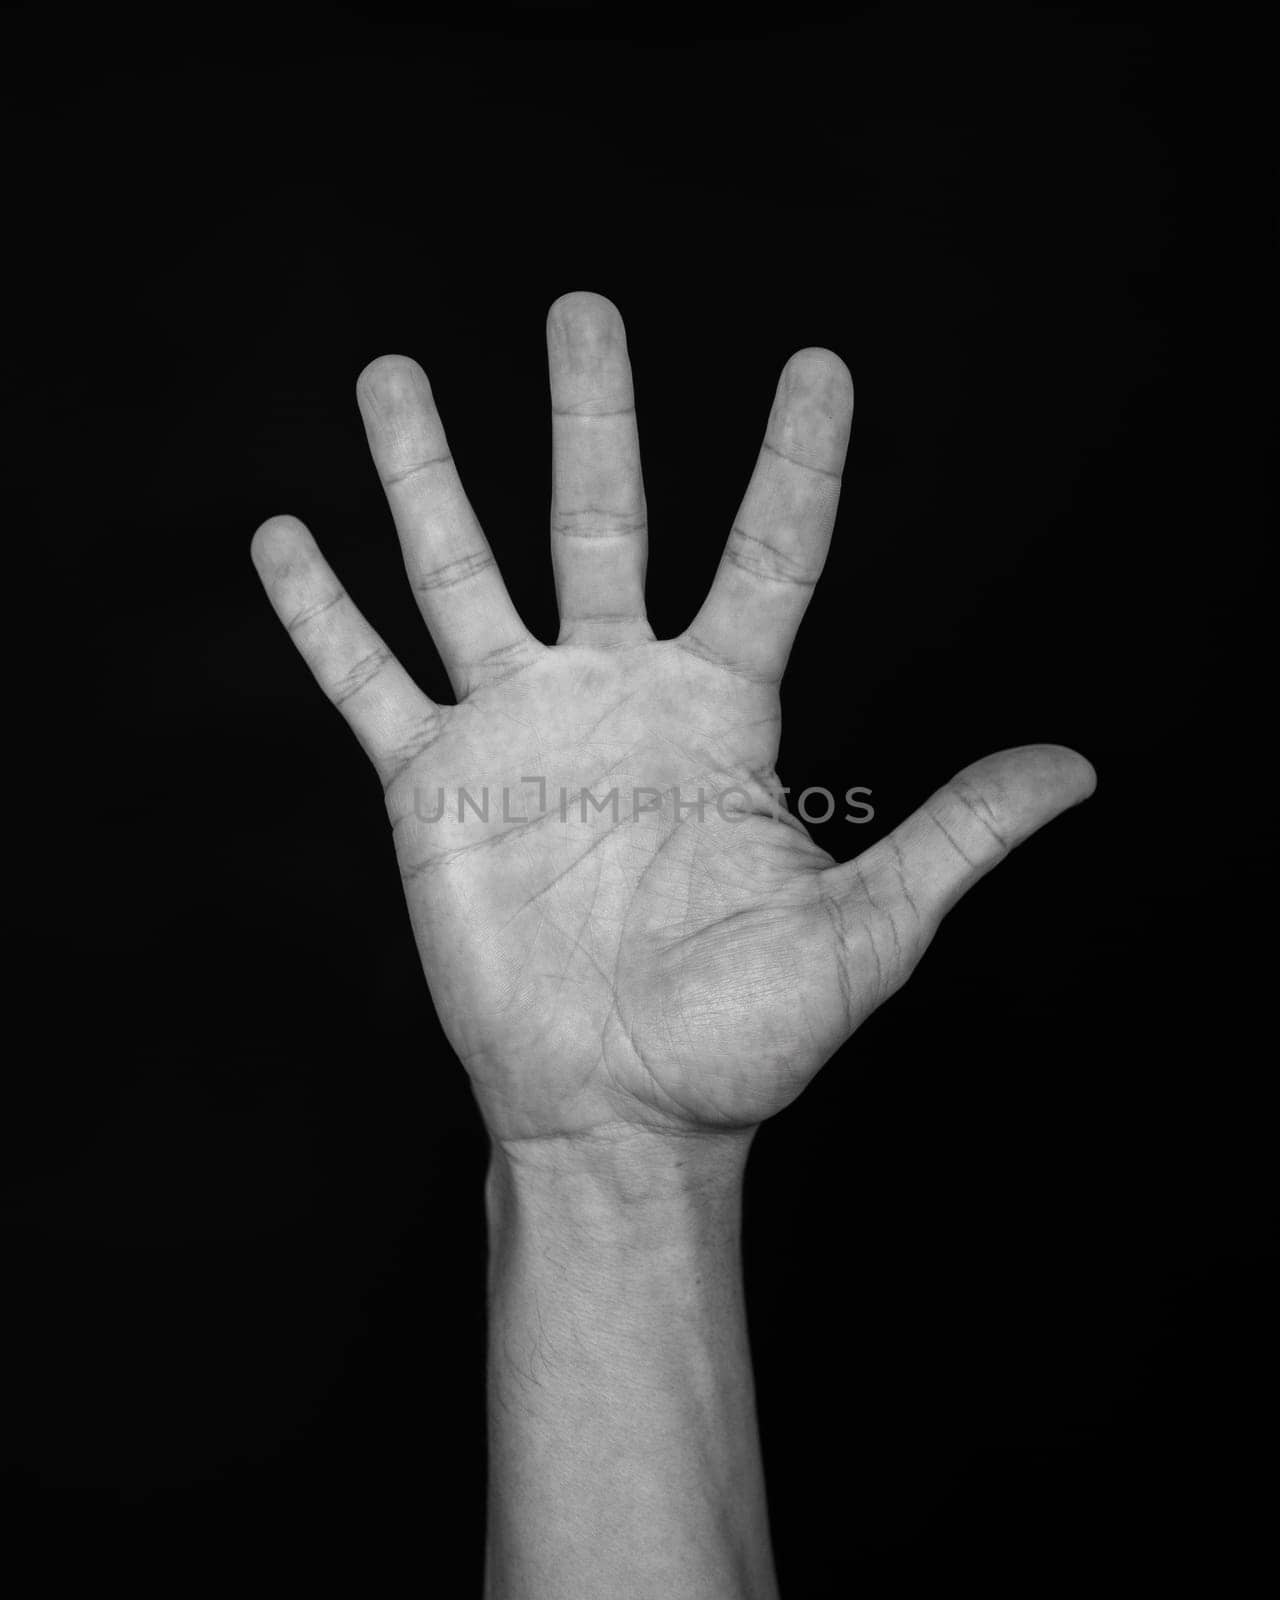 A human hand raised with fingers spread against a stark black background by apavlin